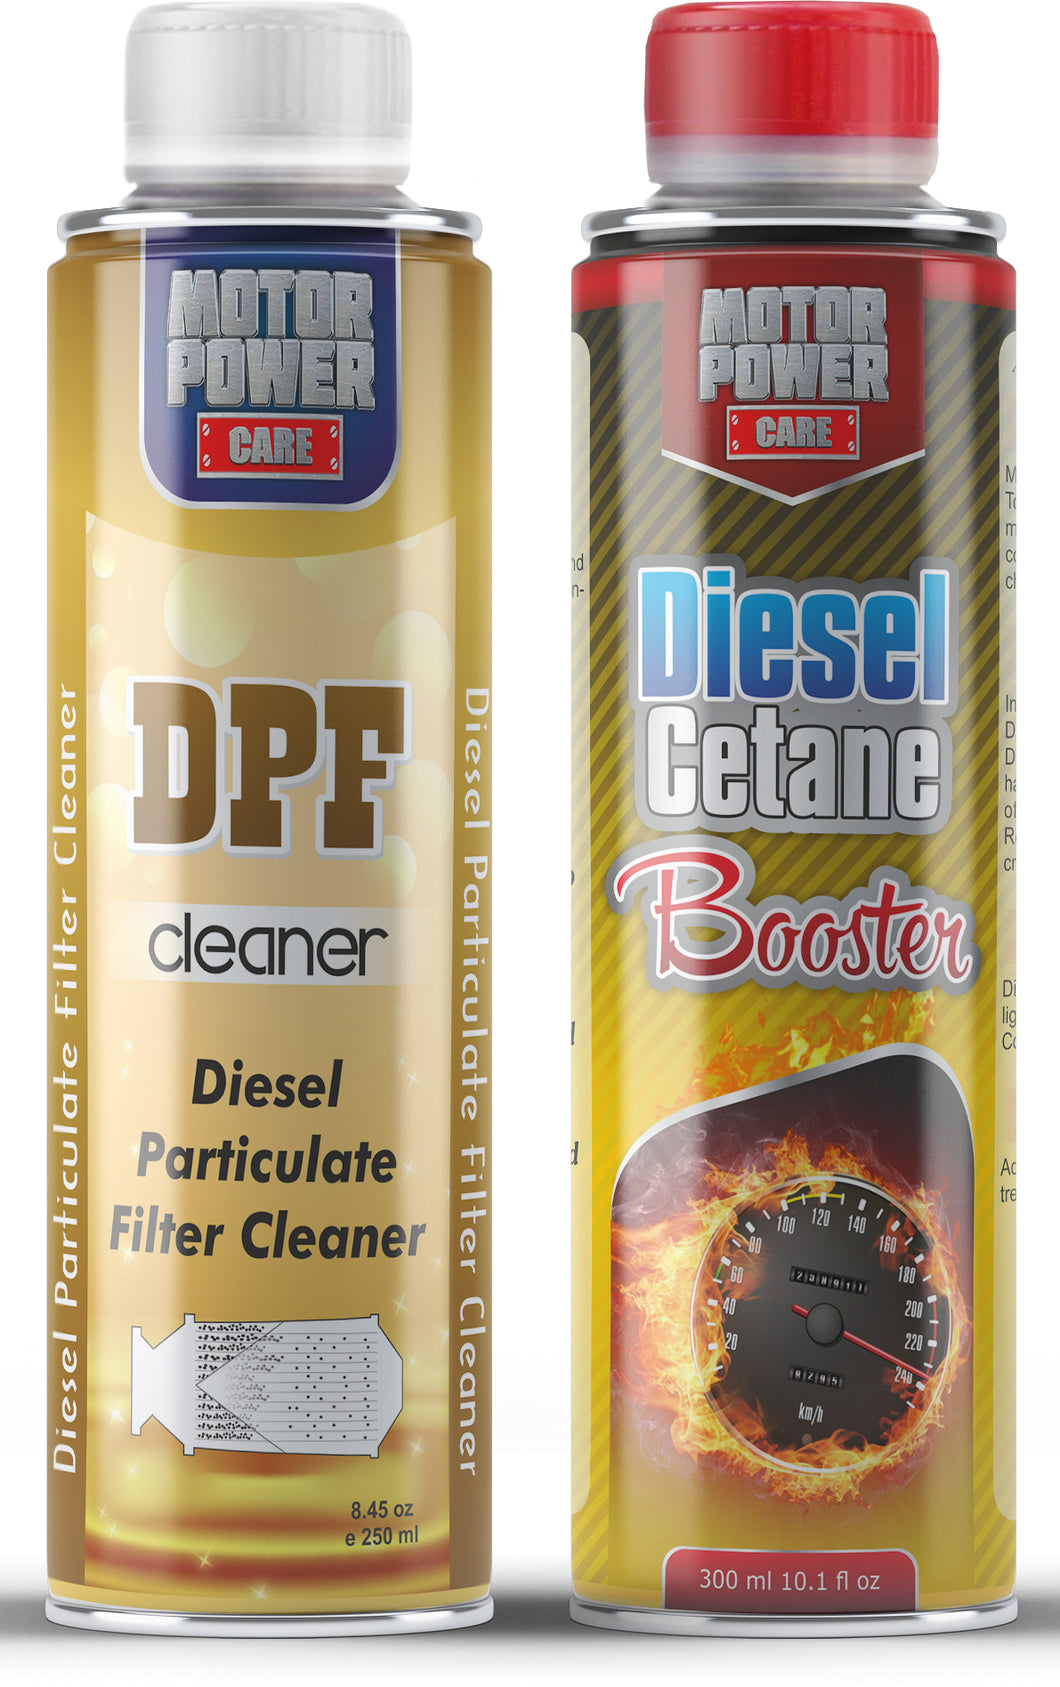 Diesel system treatment kit, DPF cleaner & Cetain Booster high perform –  MotorPower Care